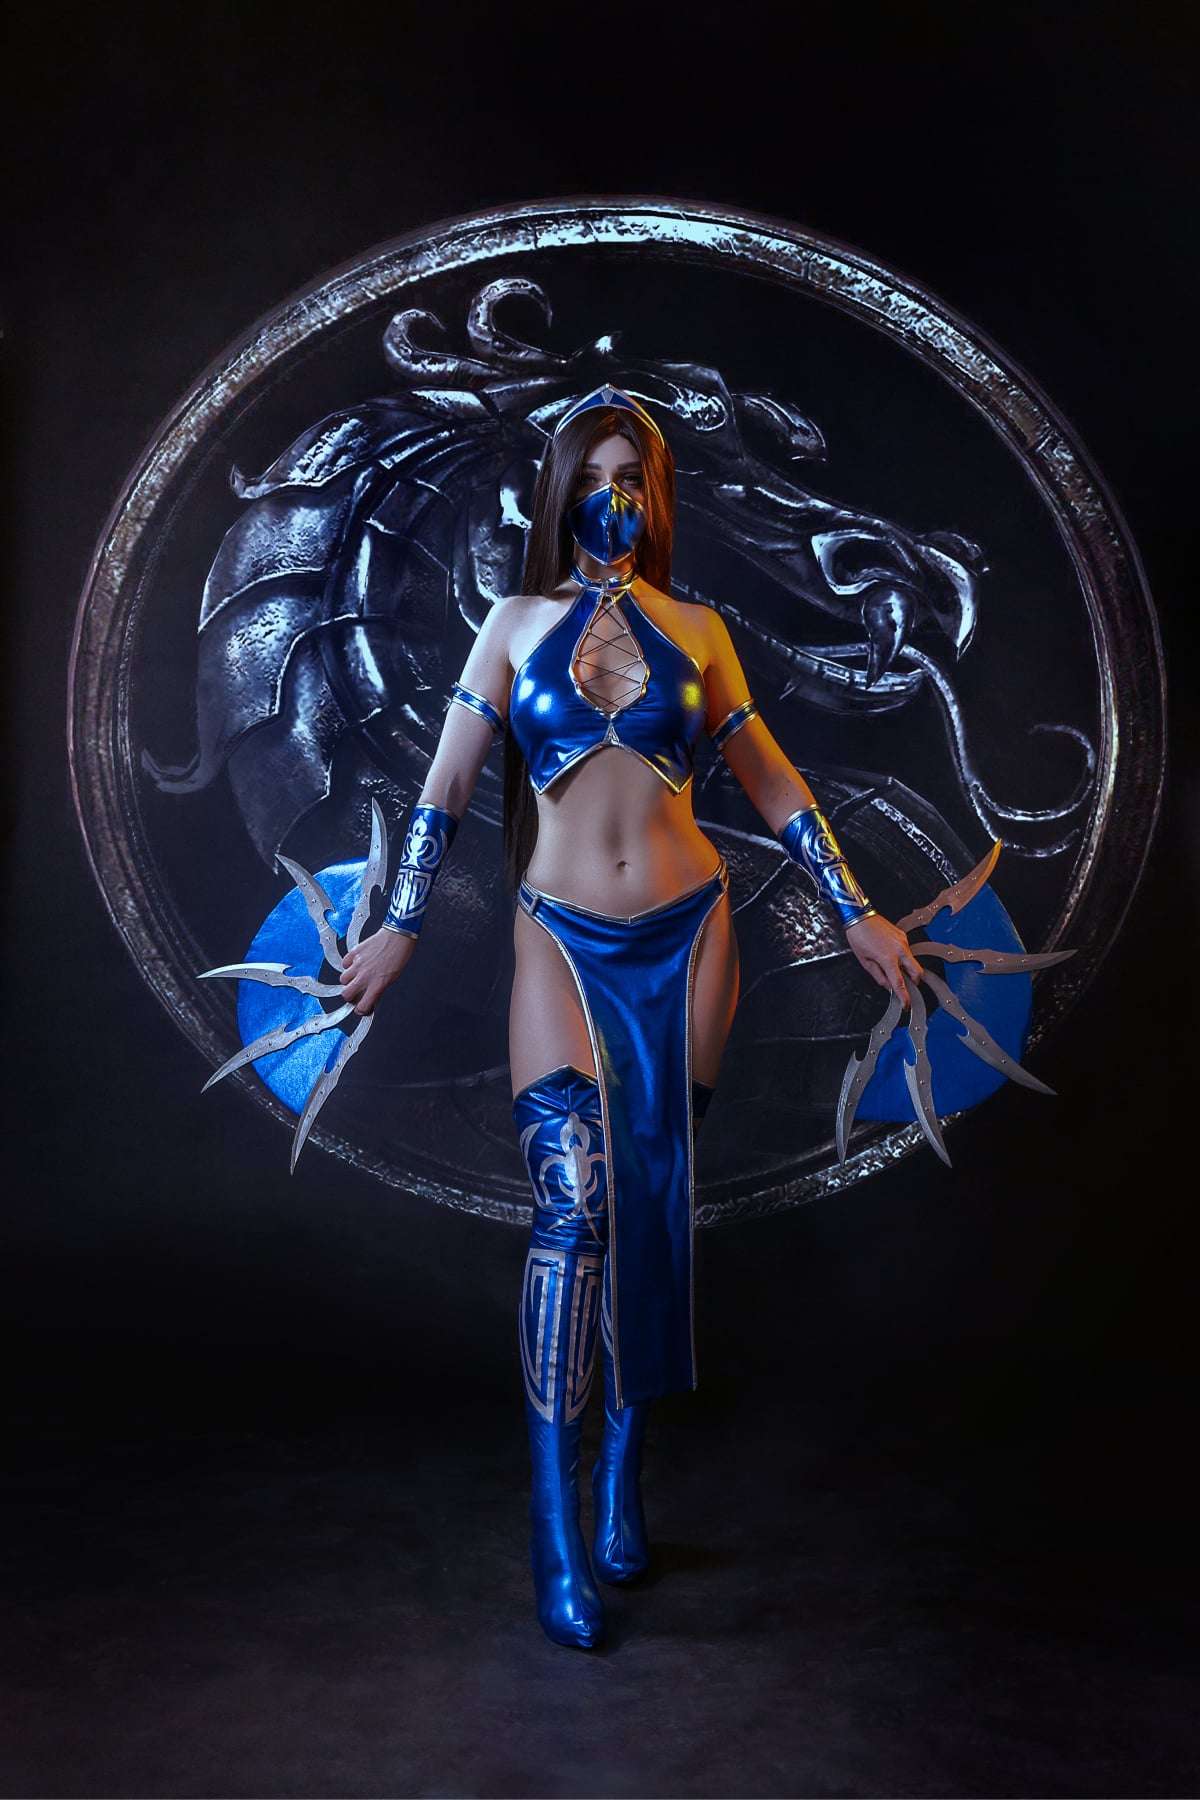 image showing I worked hard at the gym to make this Kitana from Mortal Kombat photoshoot!